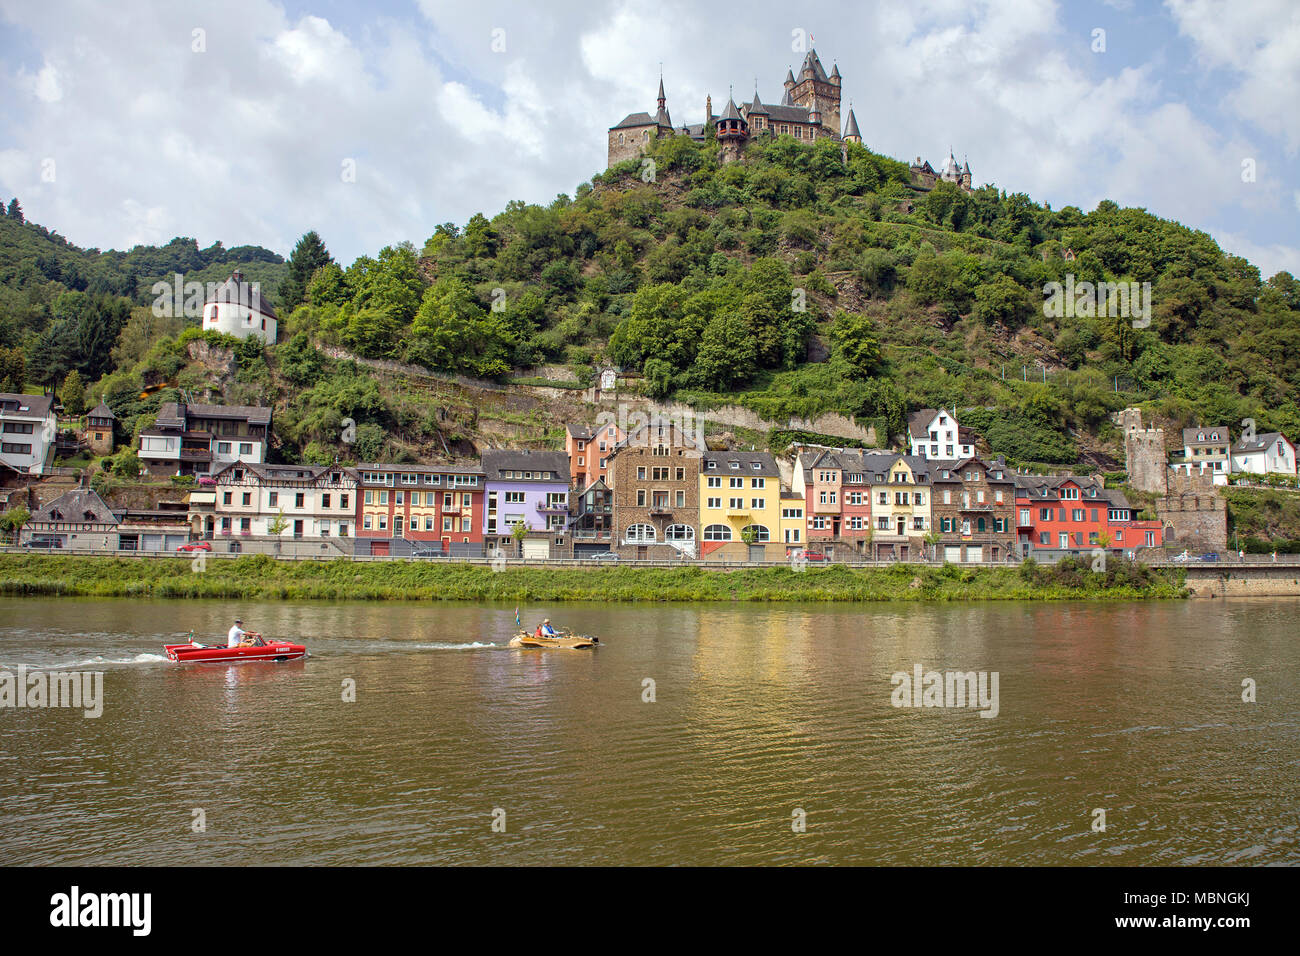 Amphibious vehicle driving on Moselle river, passing the imperial castle, Cochem, Rhineland-Palatinate, Germany Stock Photo